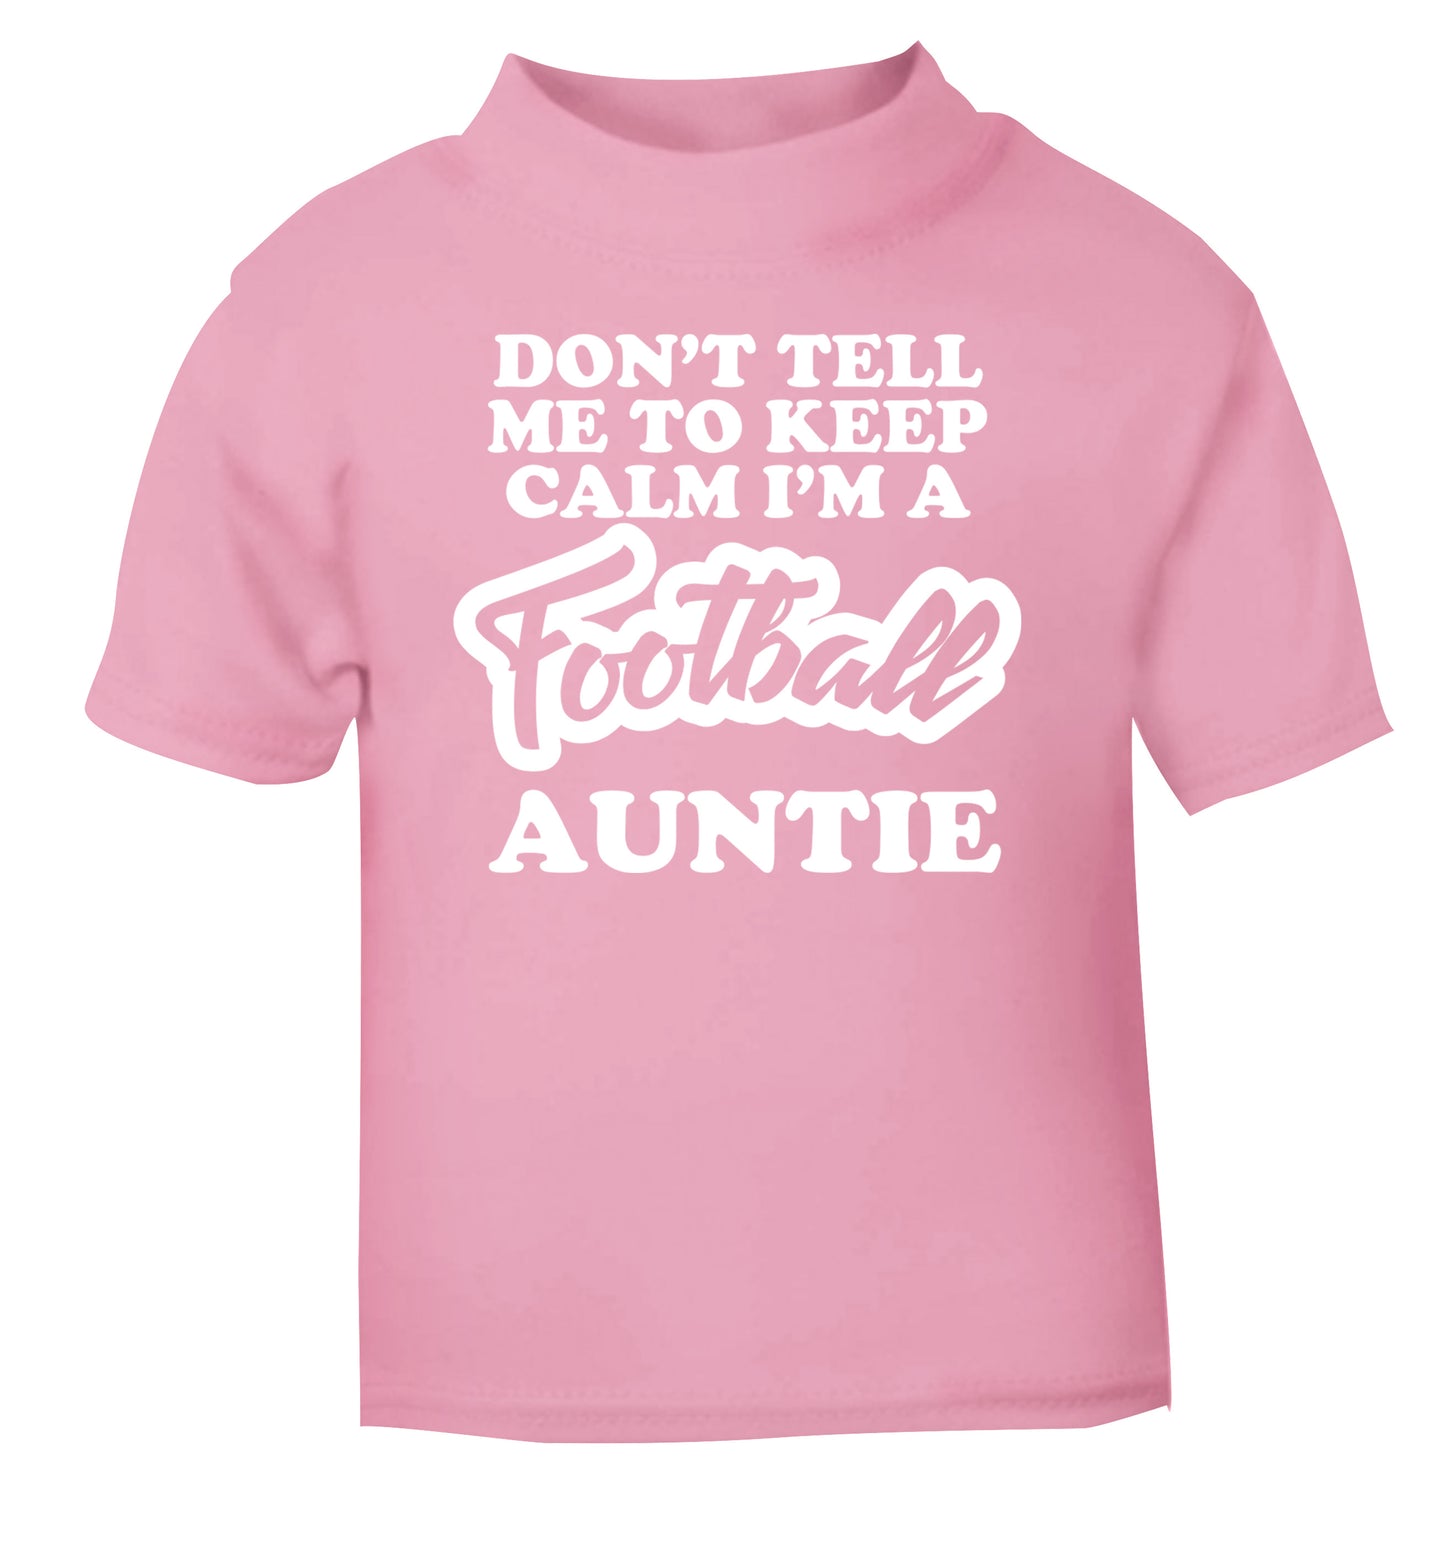 Don't tell me to keep calm I'm a football auntie light pink Baby Toddler Tshirt 2 Years